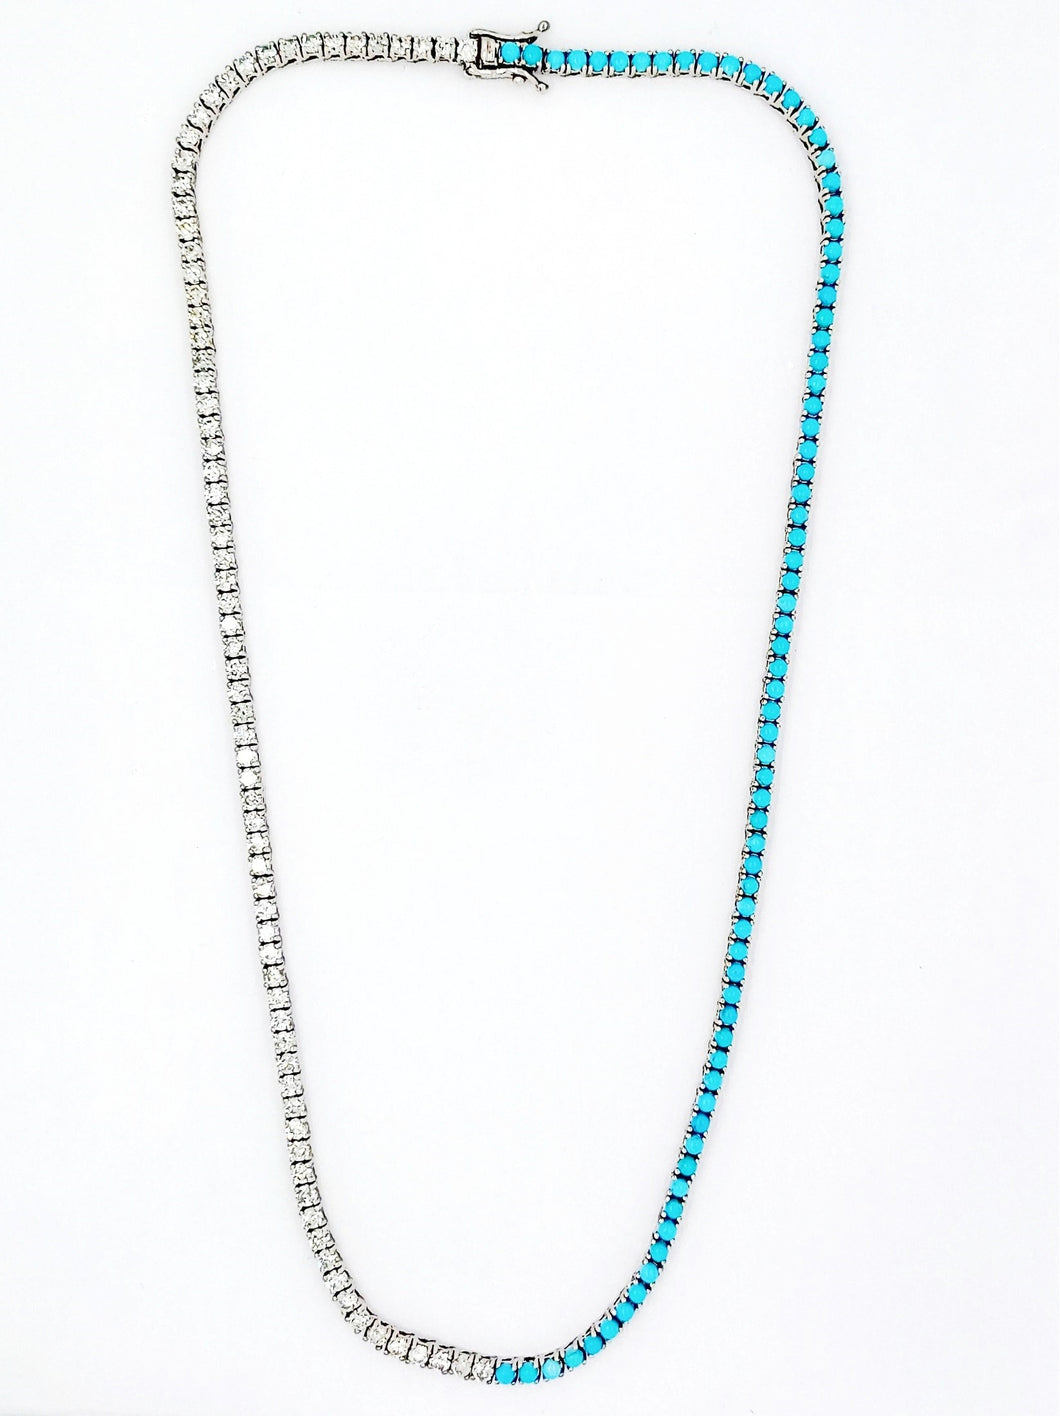 4.95 Ct Diamond 4.3 Ct Turquoise Tennis Necklace in 14K Gold